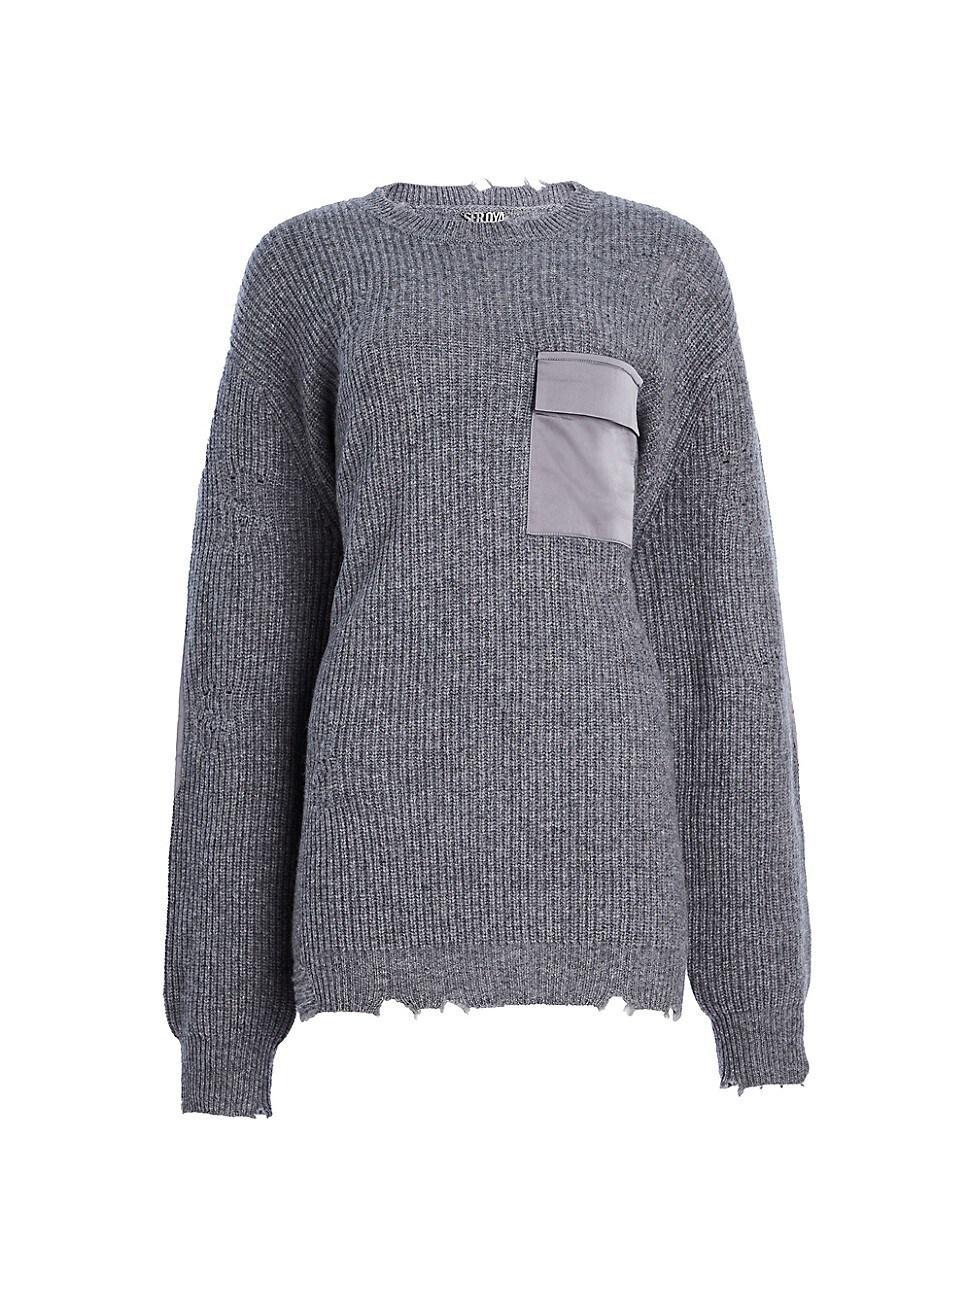 SER.O.YA Wool Devin Sweater in Grey. - size XXS (also in M, S, XS) Product Image